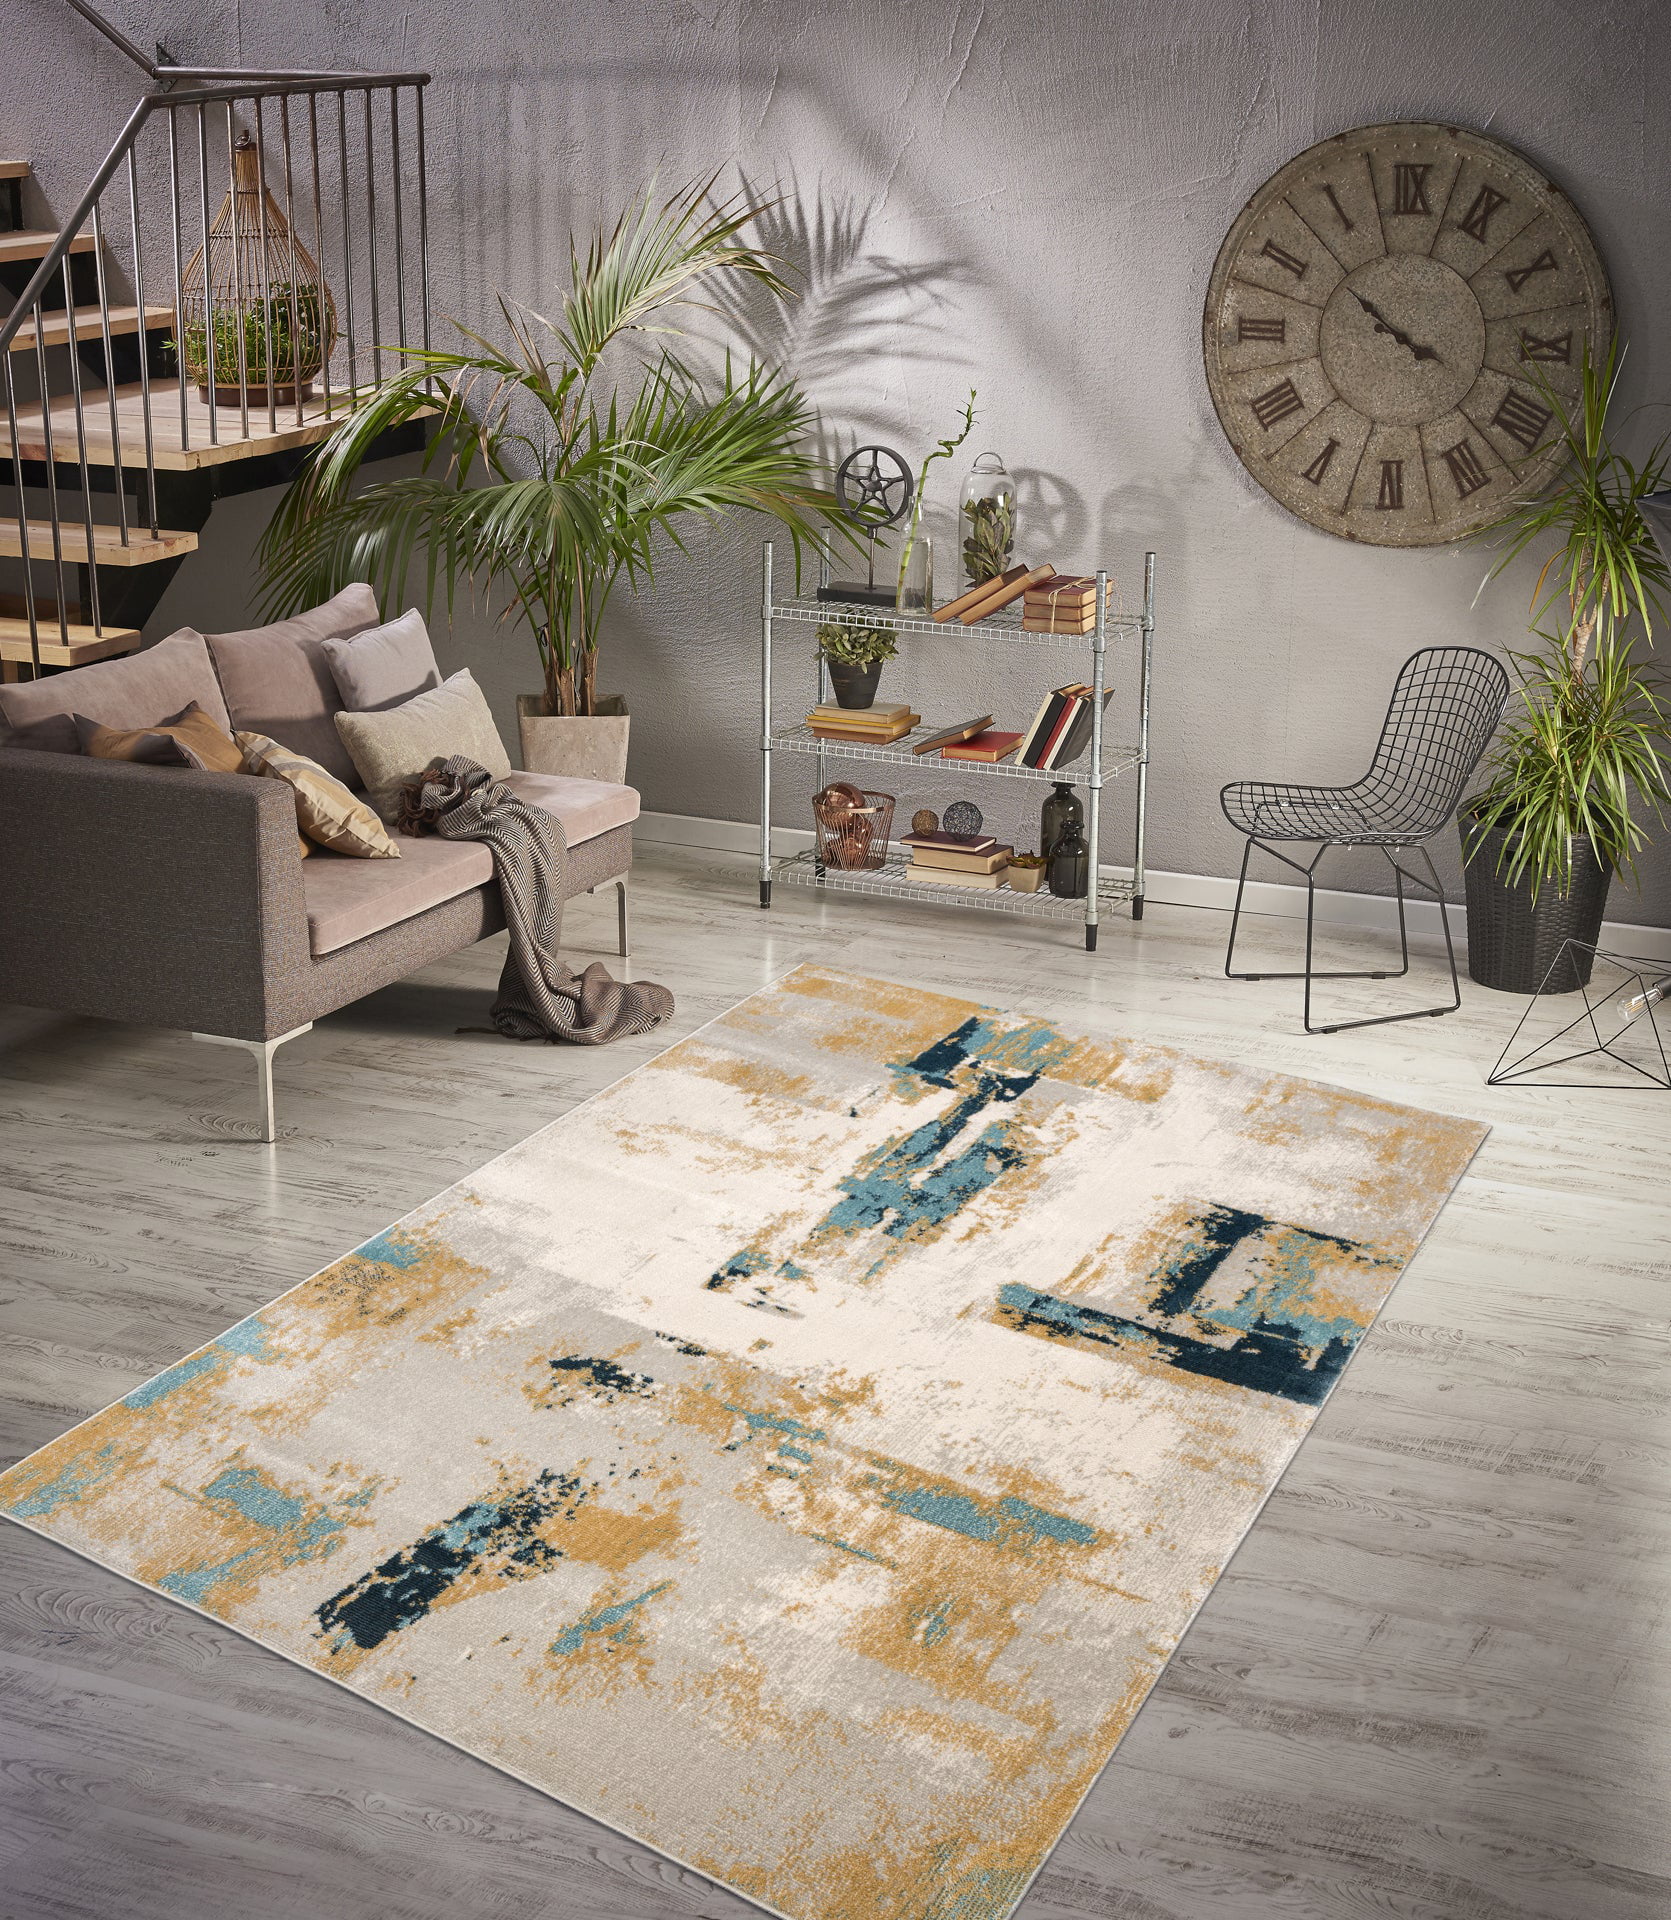  Washable Rug Living Room Rugs: 9x12 Area Rug Large Machine  Washable Luxury Floral Carpet Soft Non Slip Thin Carpets for Under Dining  Table Farmhouse Bedroom Nursery Home Office - Blue/Brown 